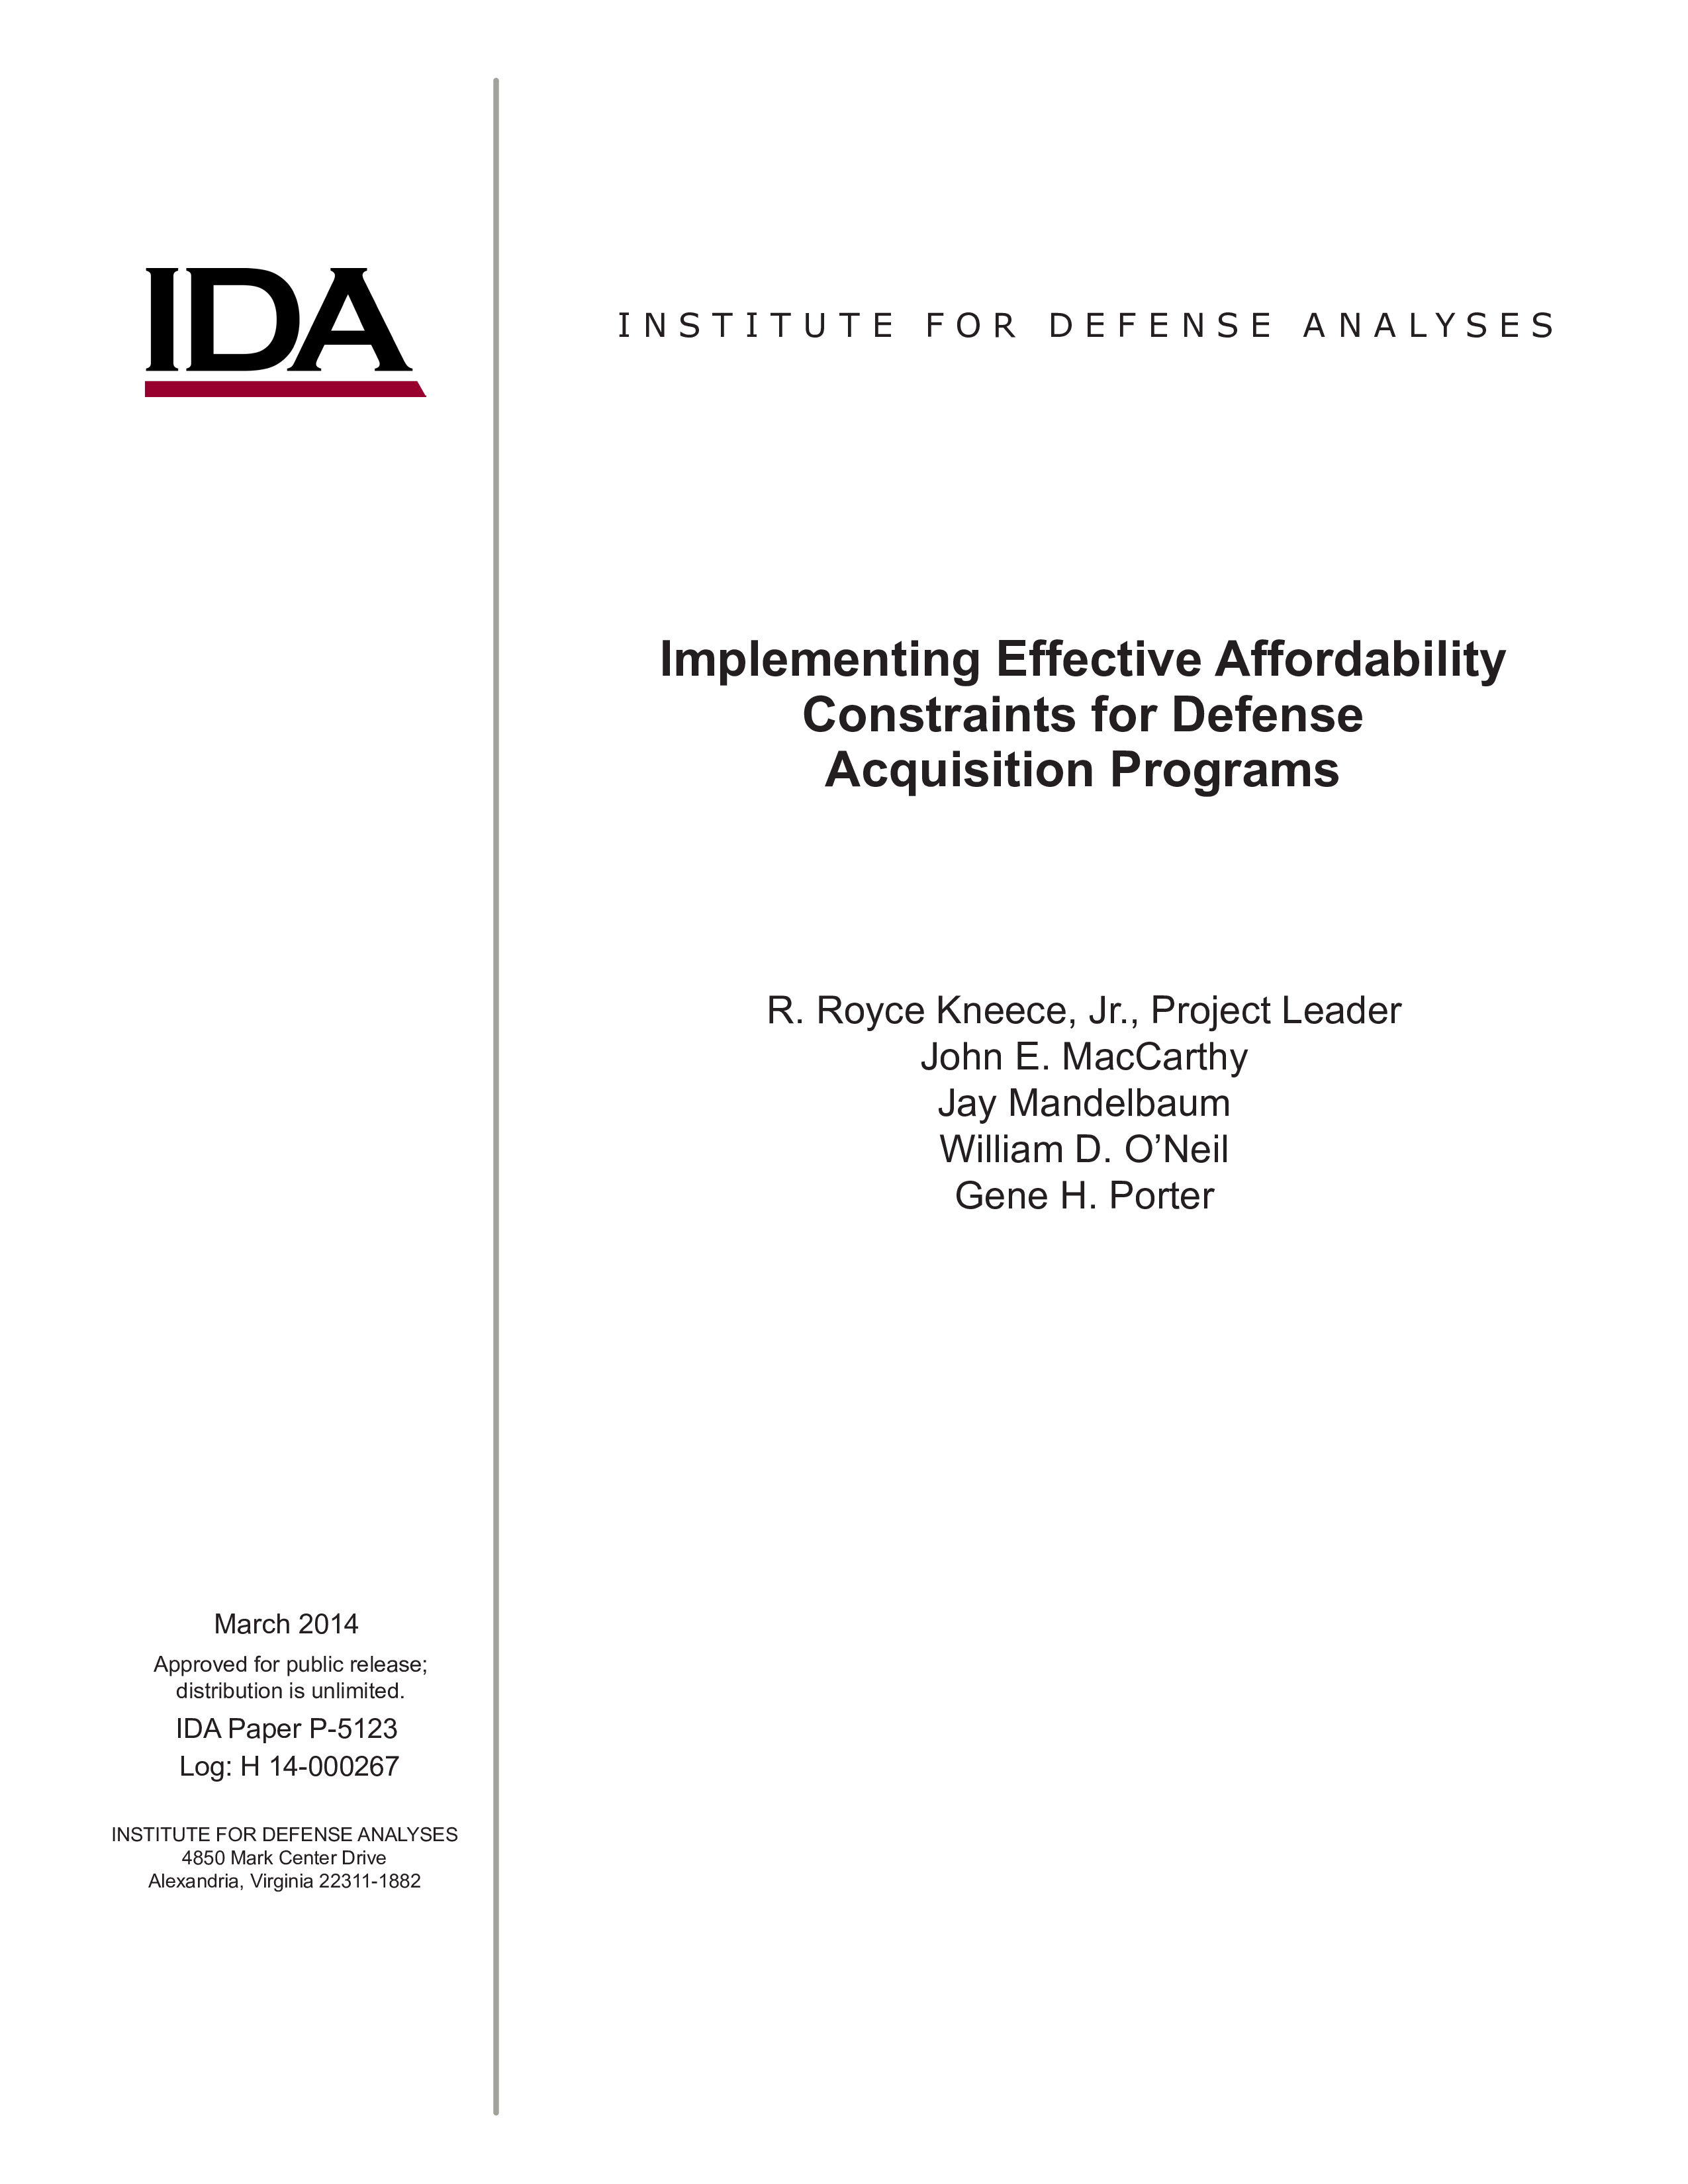 Implementing Effective Affordability Constraints for Defense Acquisition Programs